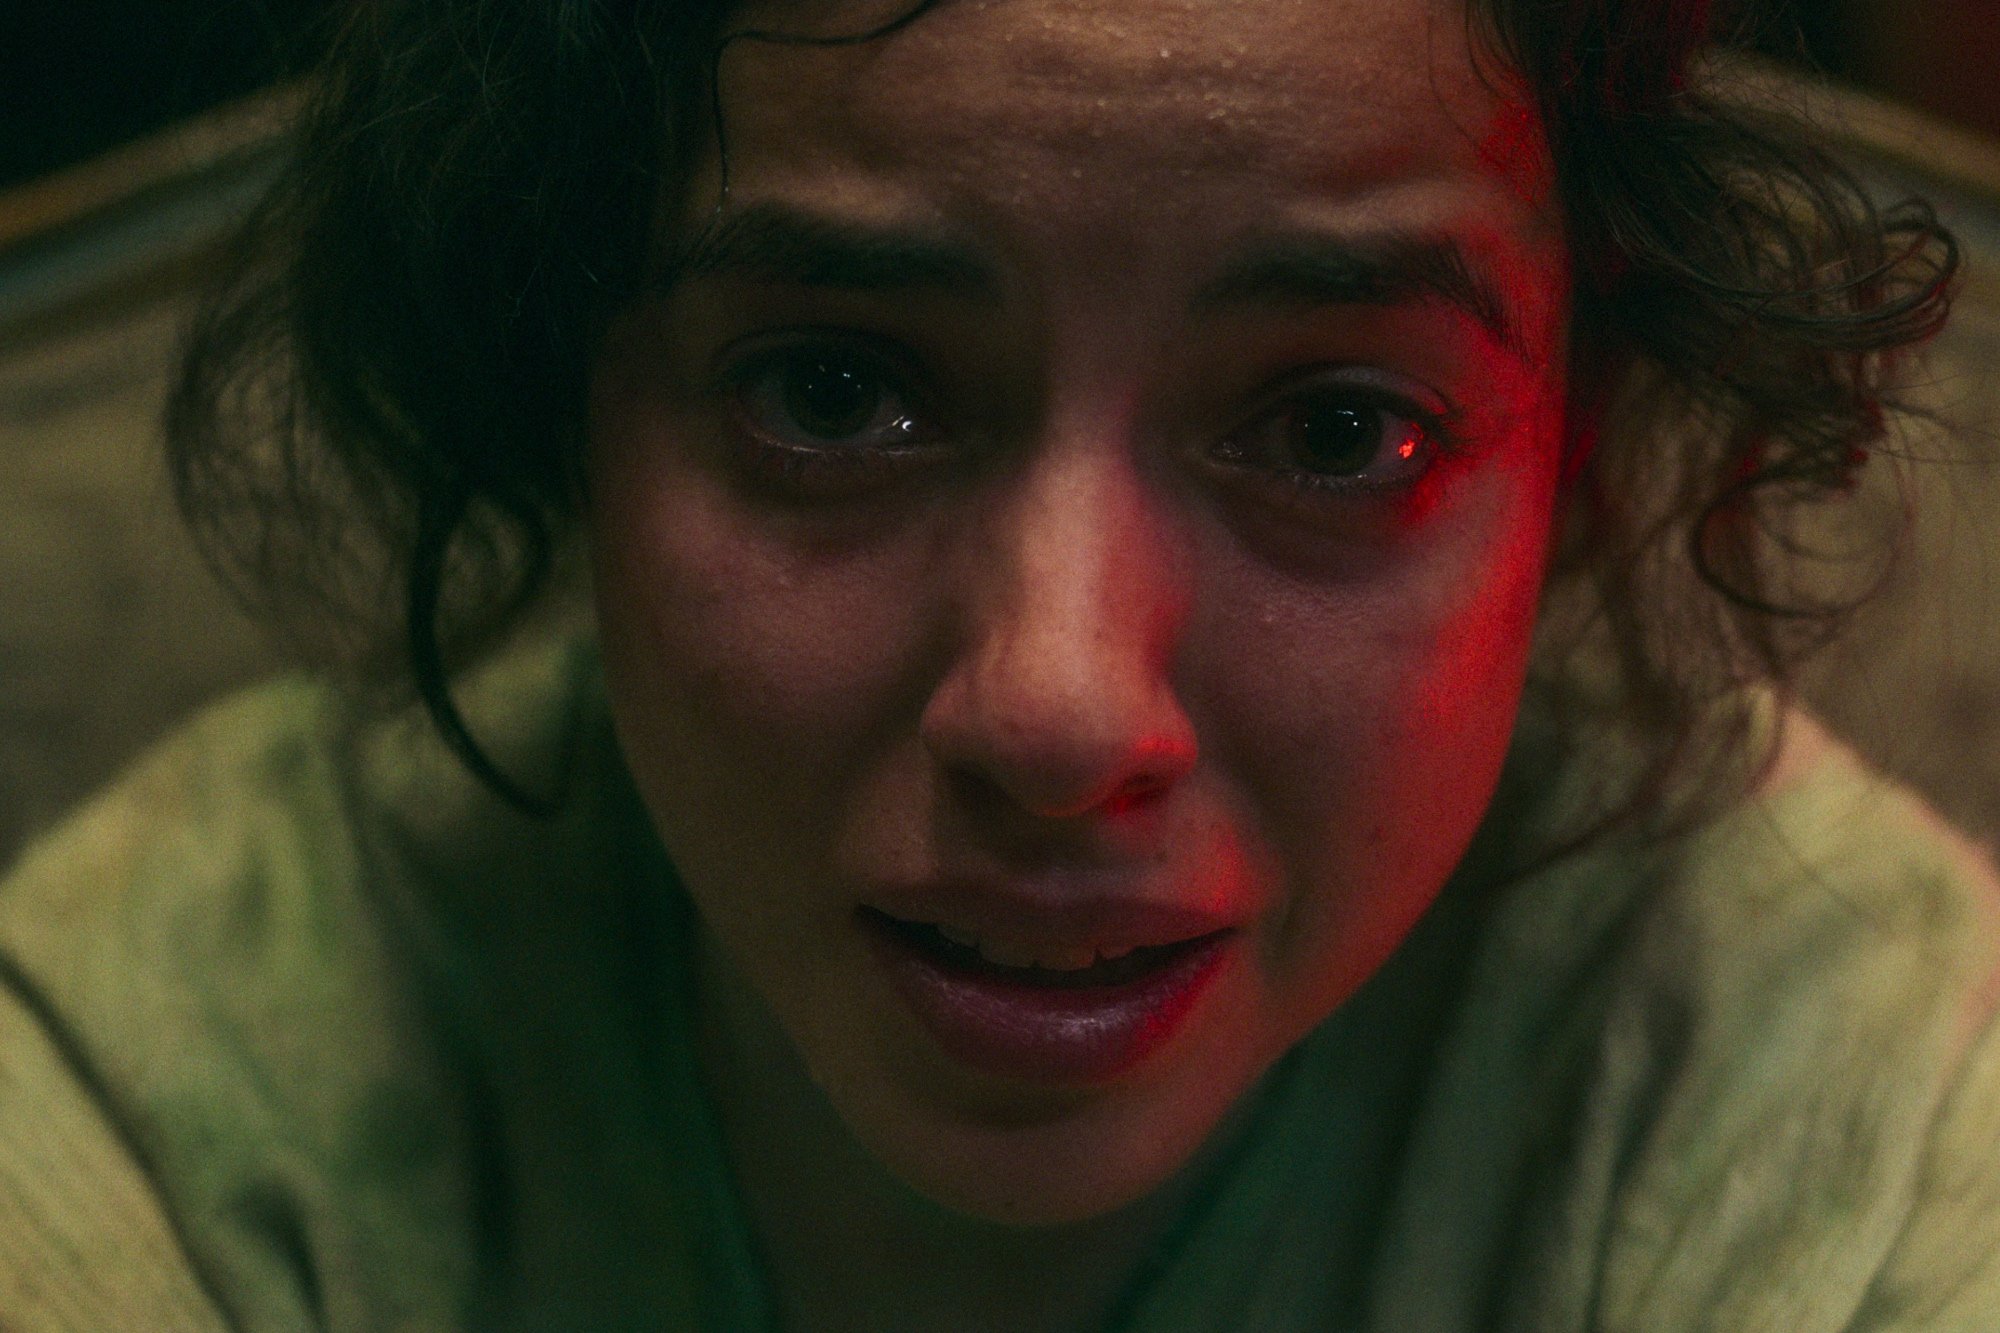 'No One Gets Out Alive' star Cristina Rodlo as Ambar looking scared